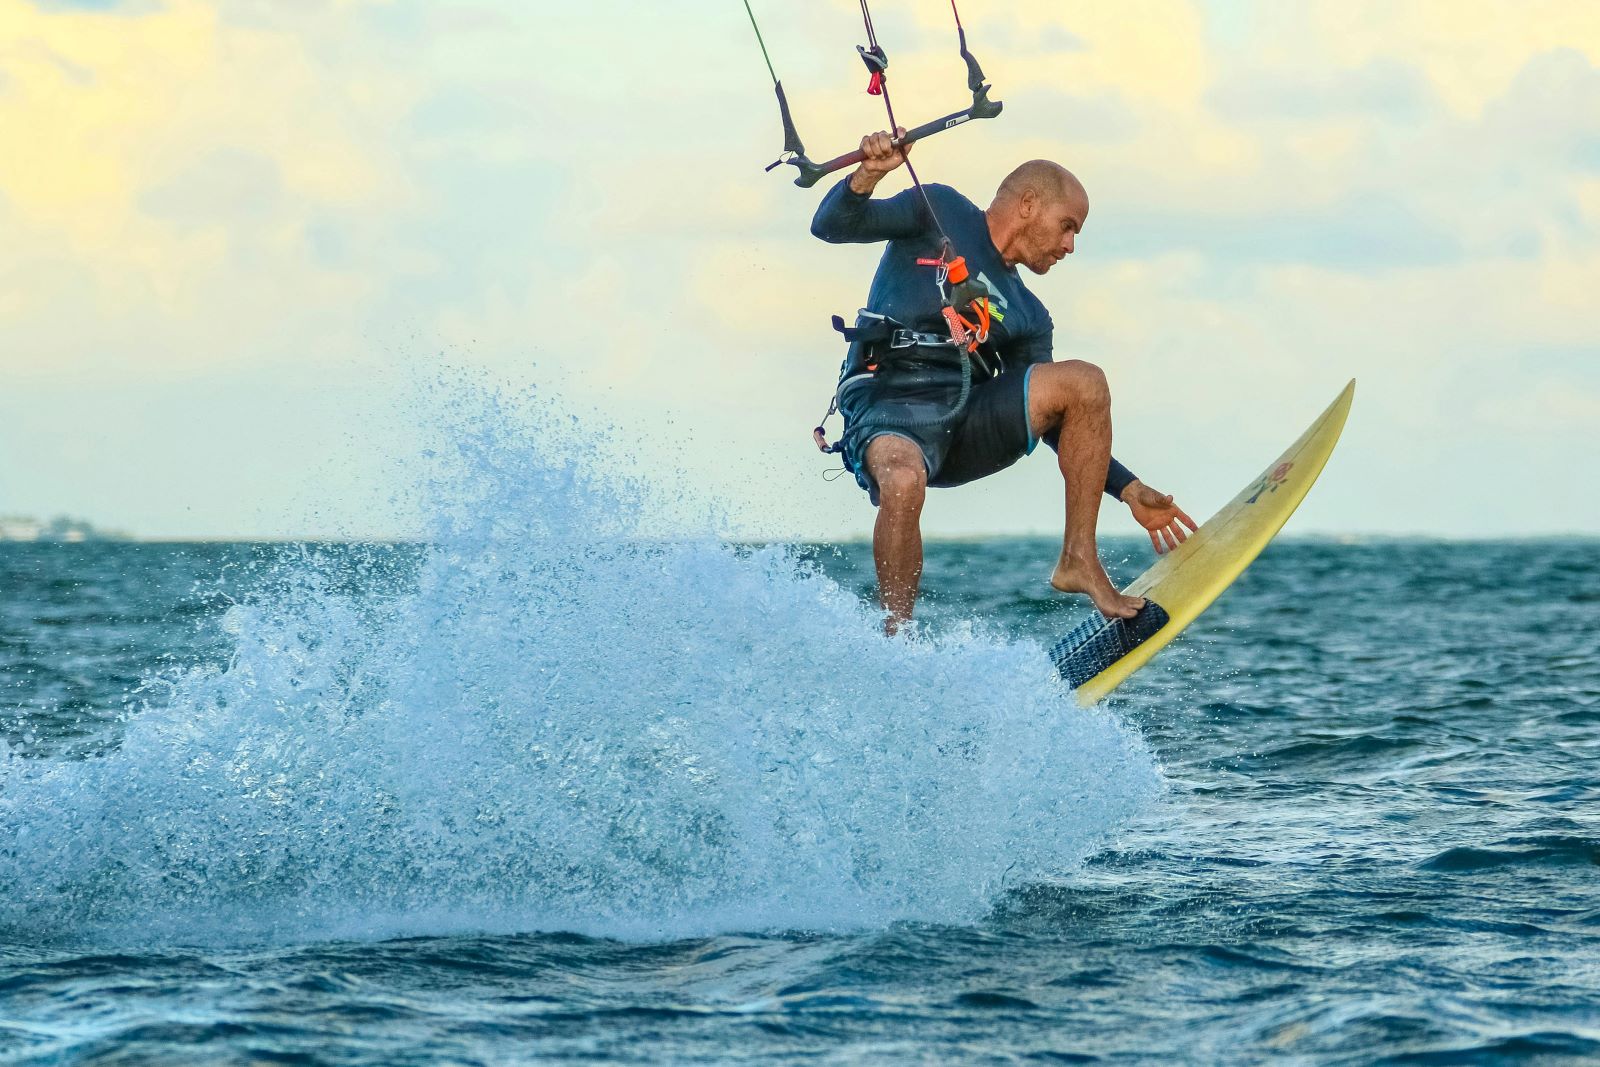 <p class="wp-caption-text">Image Credit: Pexels / APG Graphics</p>  <p>Yes, it’s a popular beach, but most don’t tackle kiteboarding. It’s thrilling, and you’ll definitely stand out from the usual beach crowd.</p>